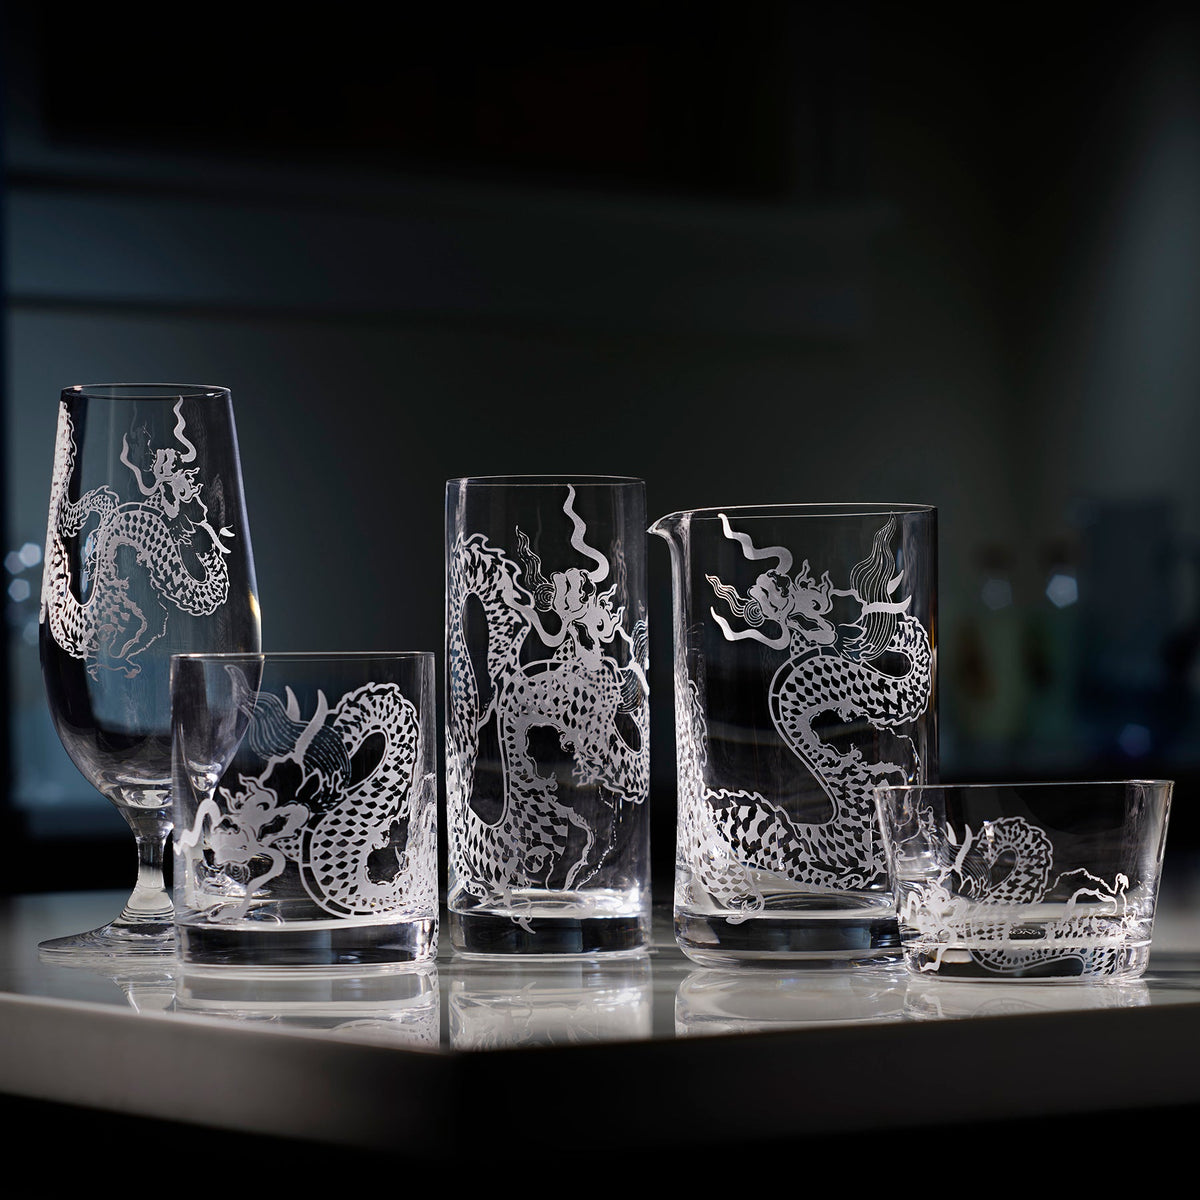 The sand etched dragon collection by Caskata, featuring beer, short, tall mixing and tidbit forms.